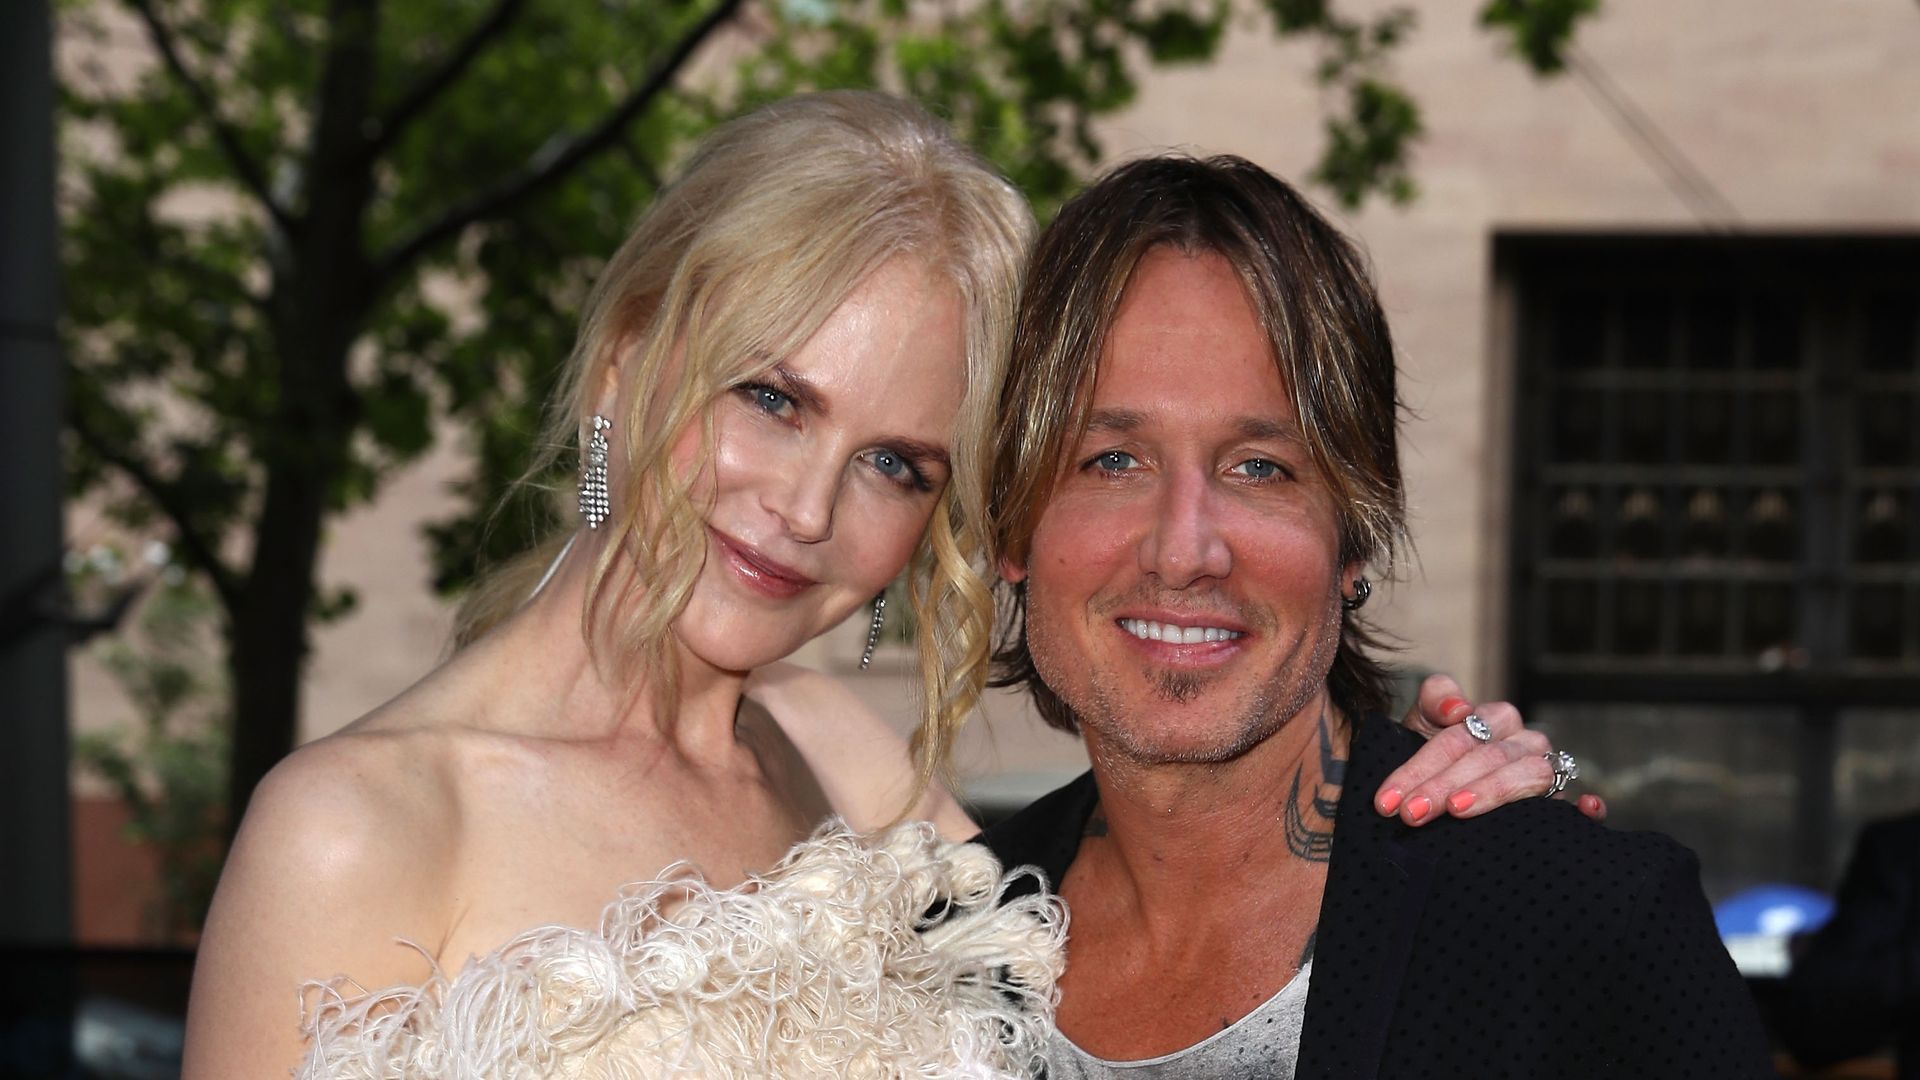 Nicole Kidman and Keith Urban arrive for the 32nd Annual ARIA Awards 2018 at The Star on November 28, 2018 in Sydney, Australia